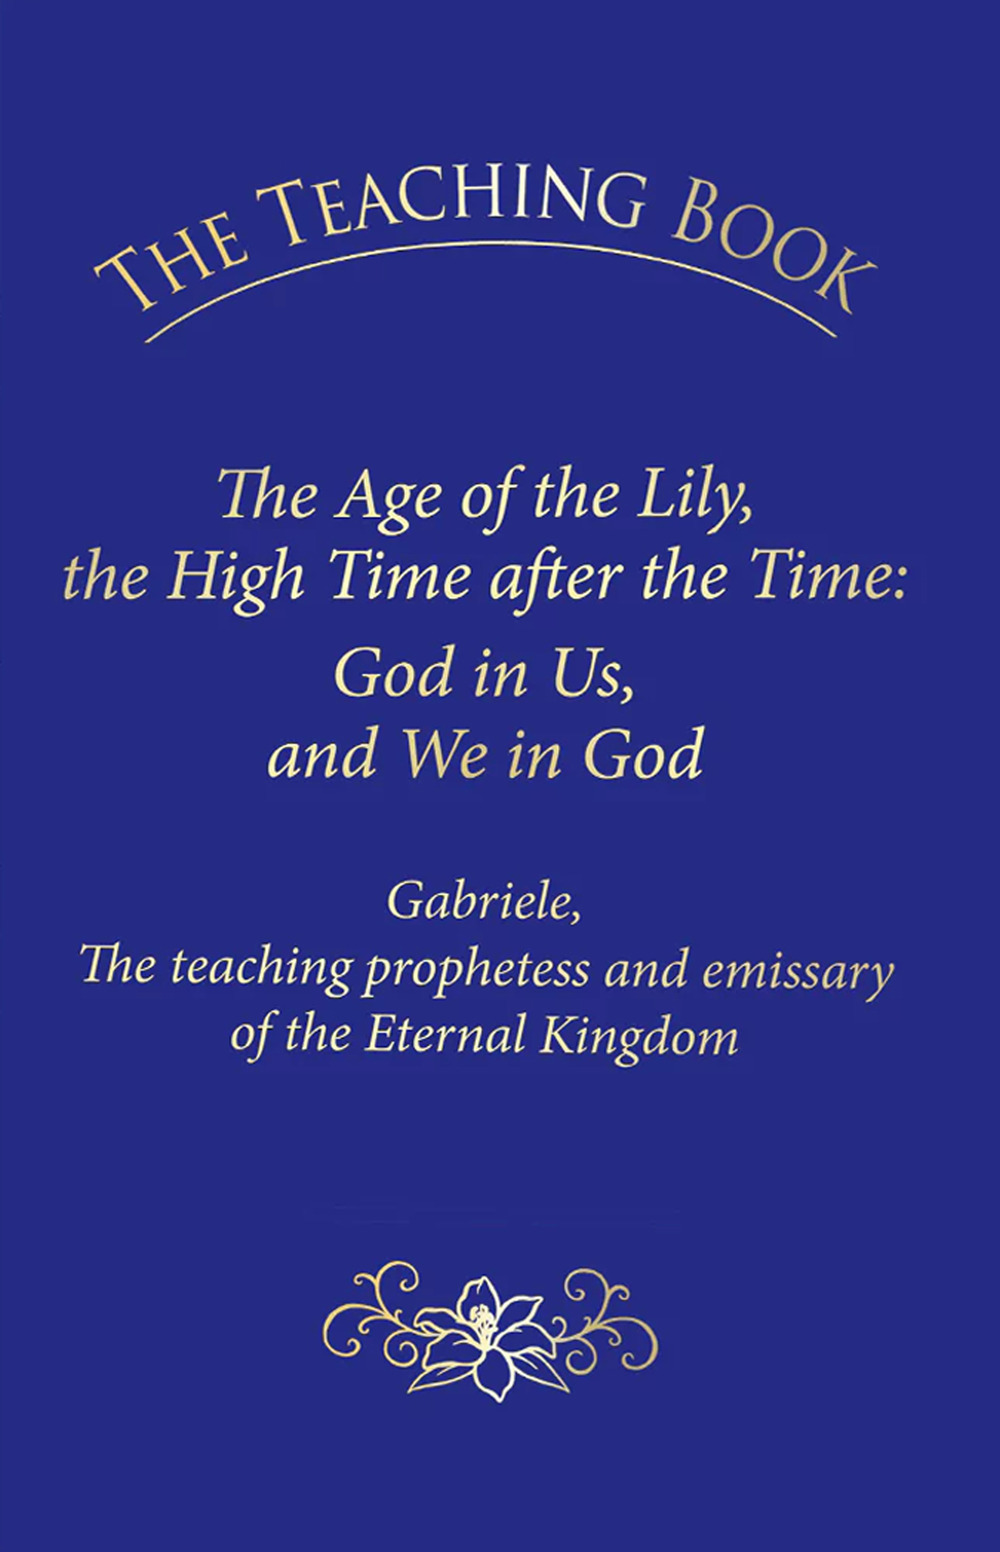 The teaching book. The age of the lily, the high time after the time: God in us, and we in God